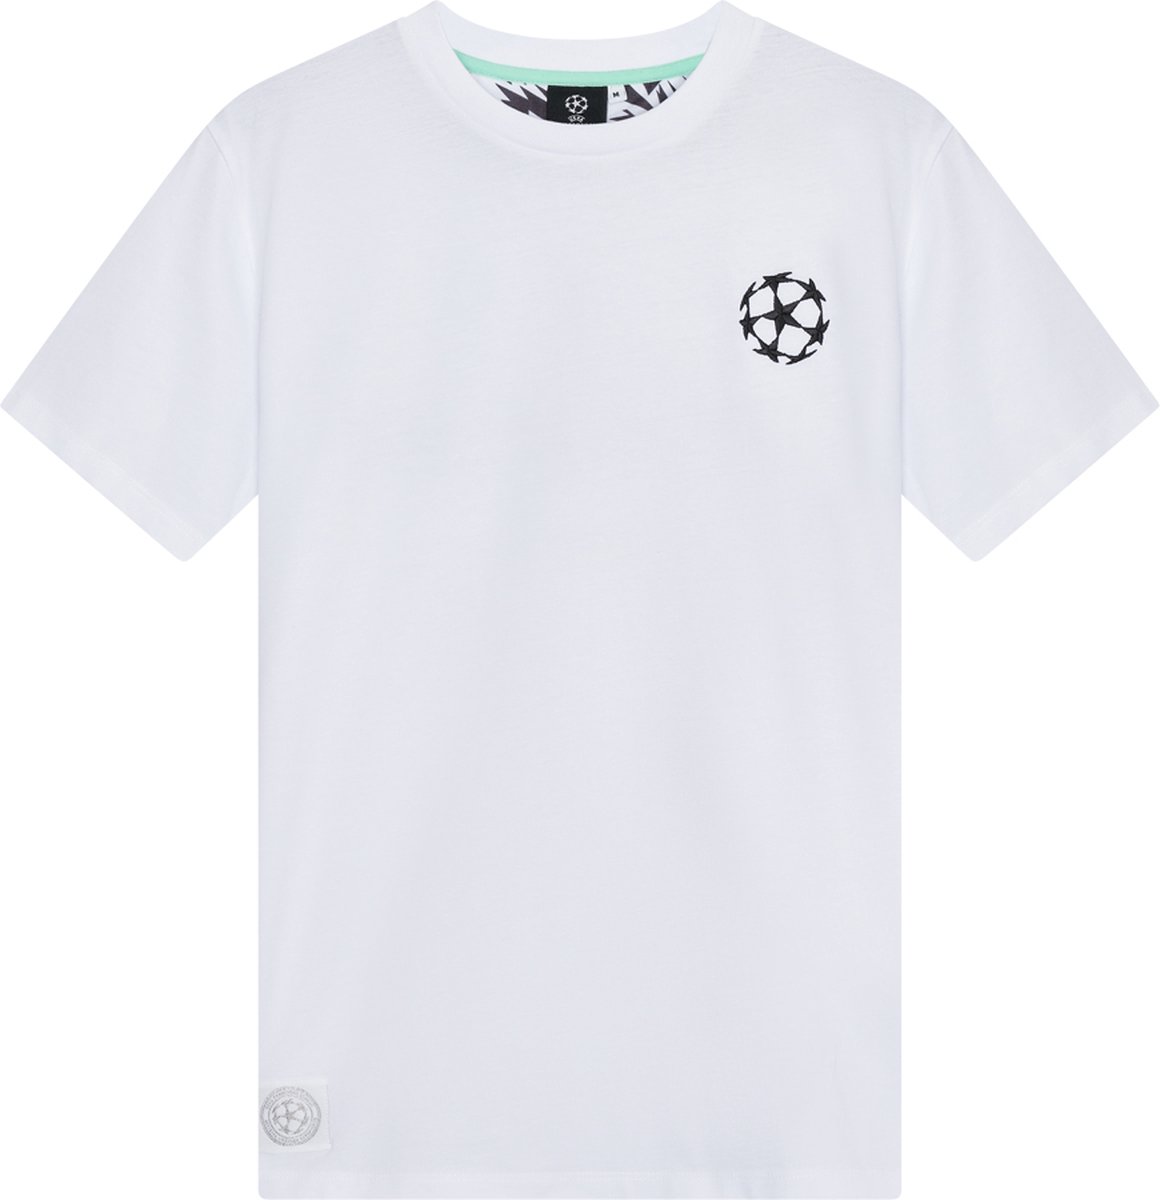 Champions League lifestyle t-shirt - maat S